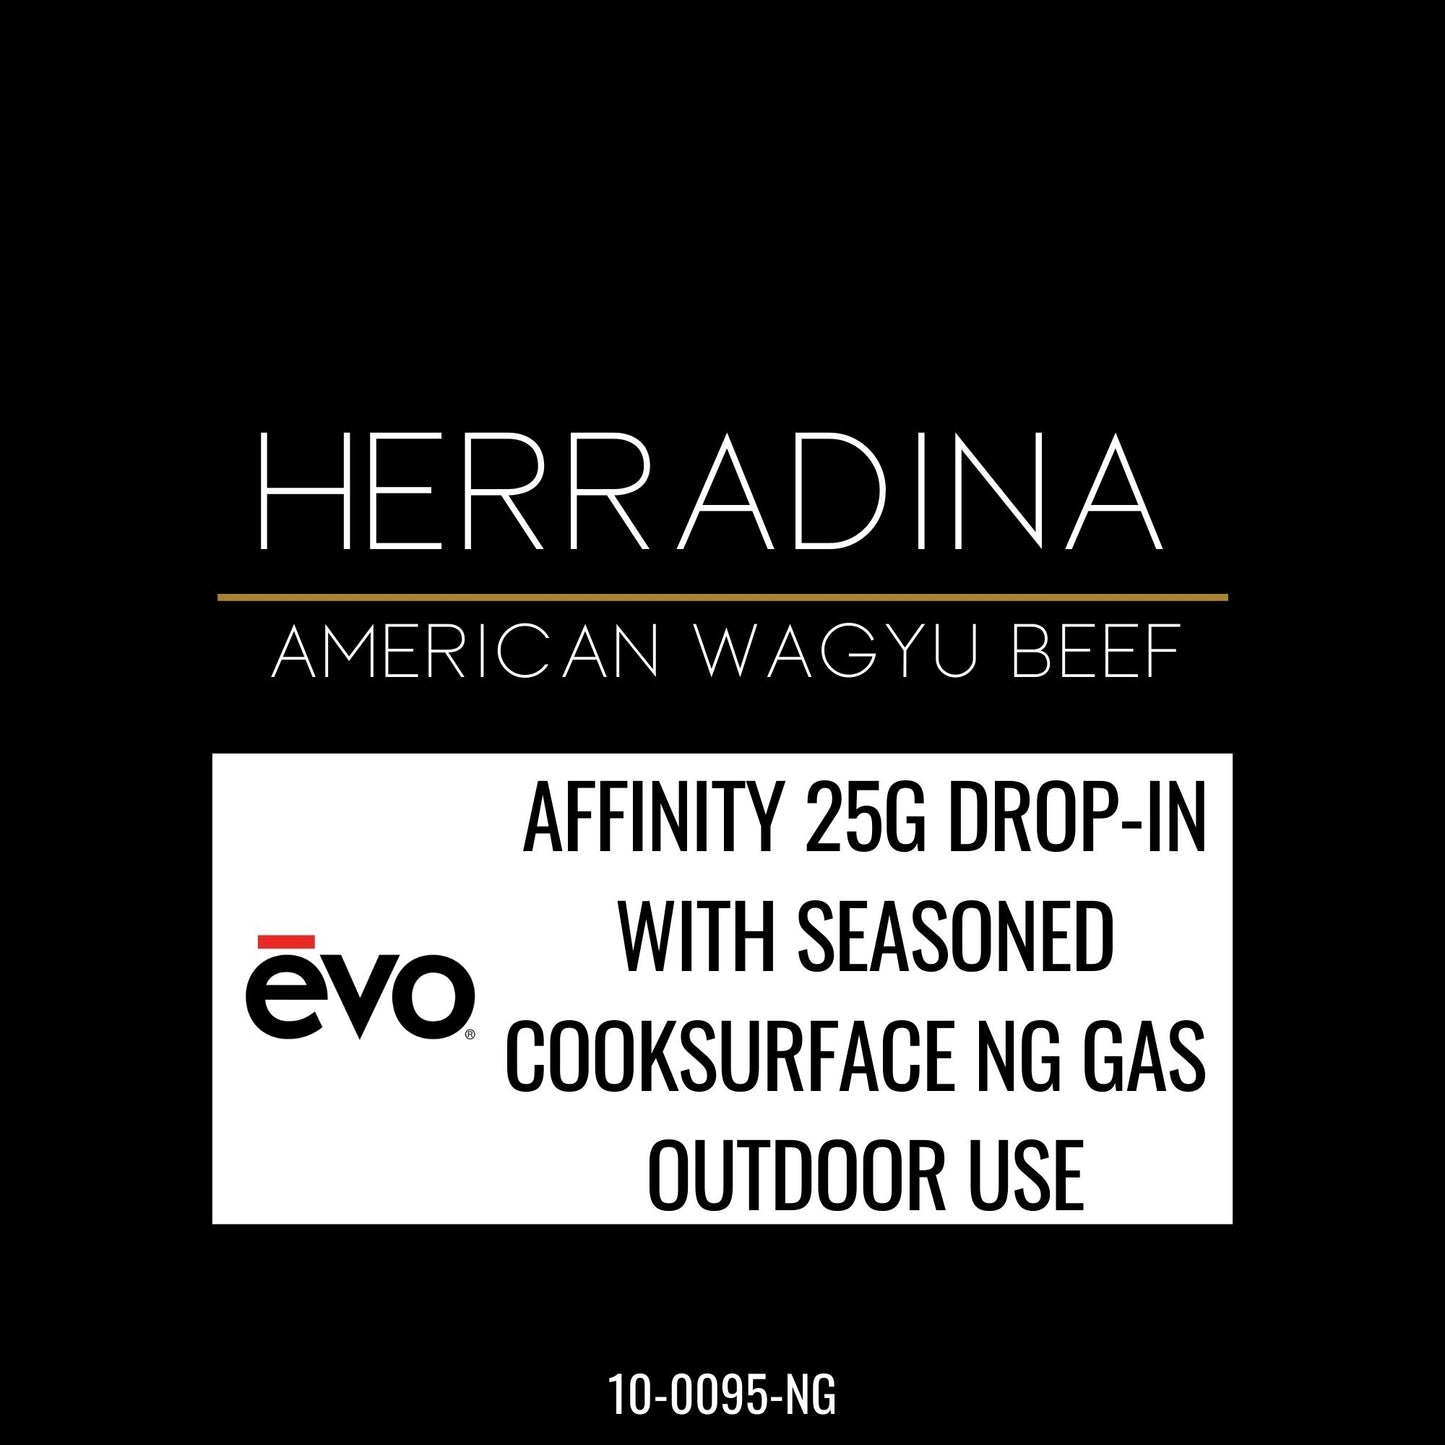 EVO AFFINITY 25G DROP-IN WITH SEASONED COOKSURFACE NG GAS - FULLY ASSEMBLED FOR OUTDOOR USE